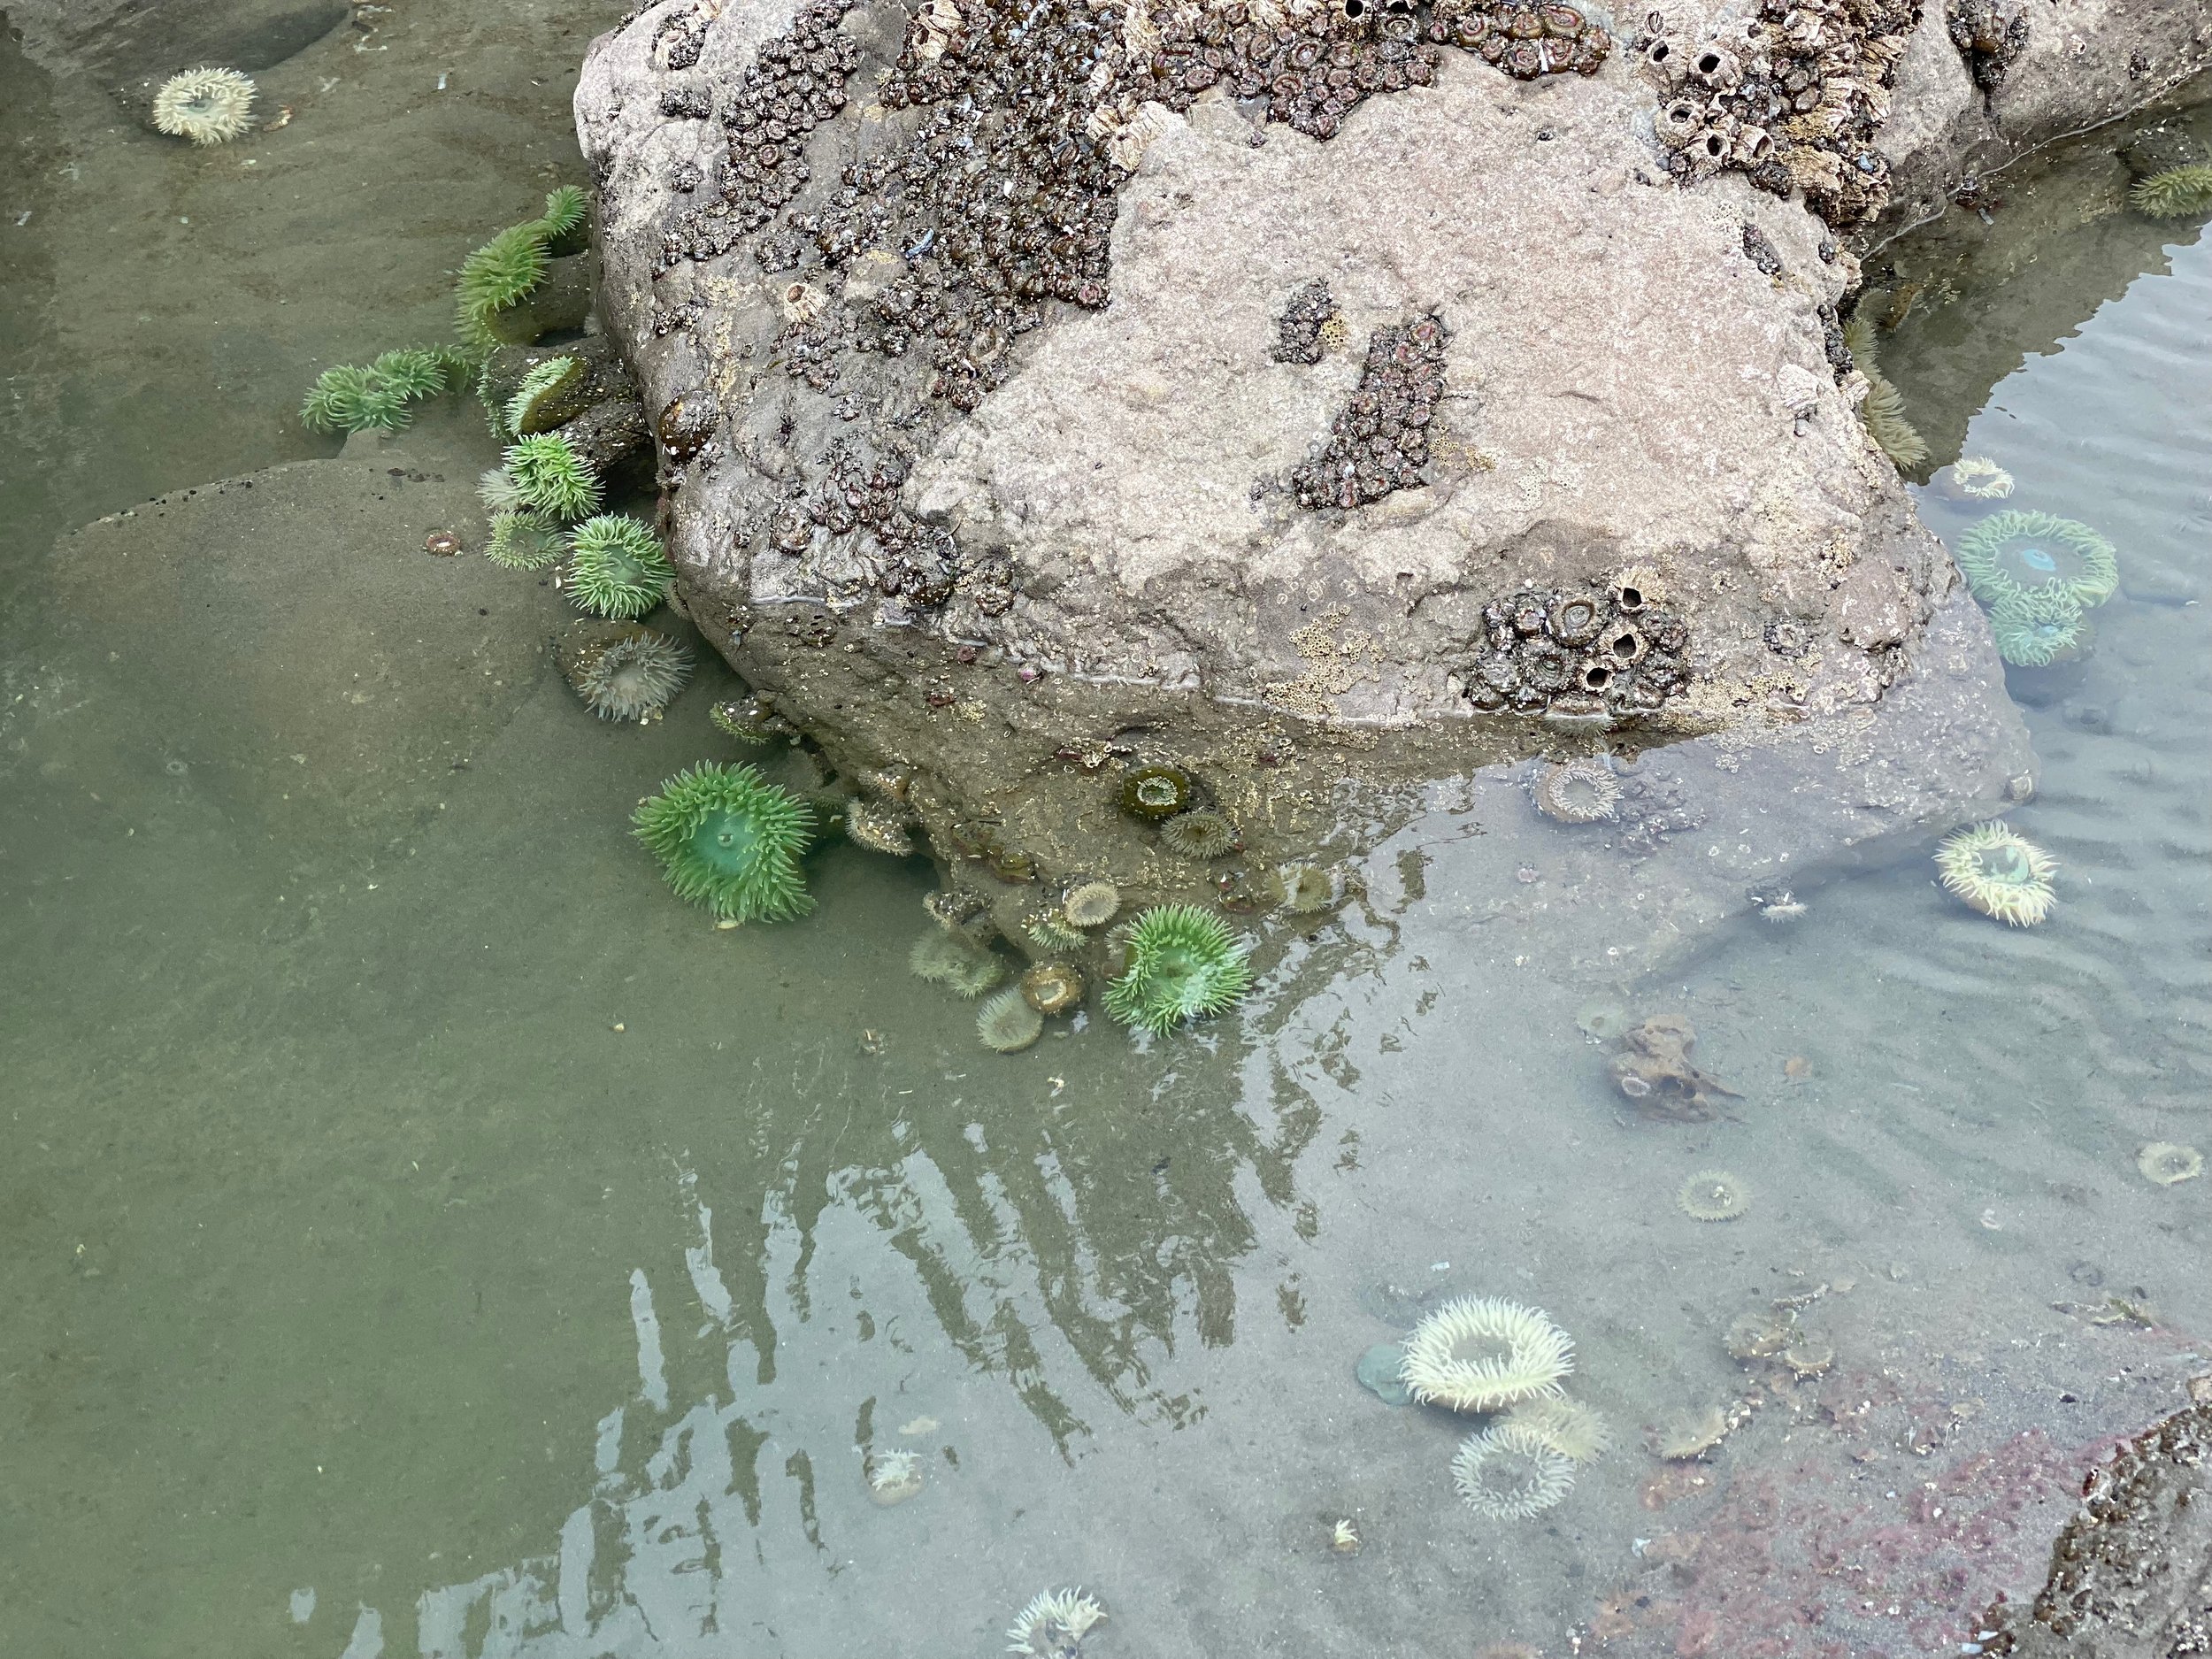 An exceptionally clear and calm tidepool shows brilliant sea anemones enjoying the remaining water cover